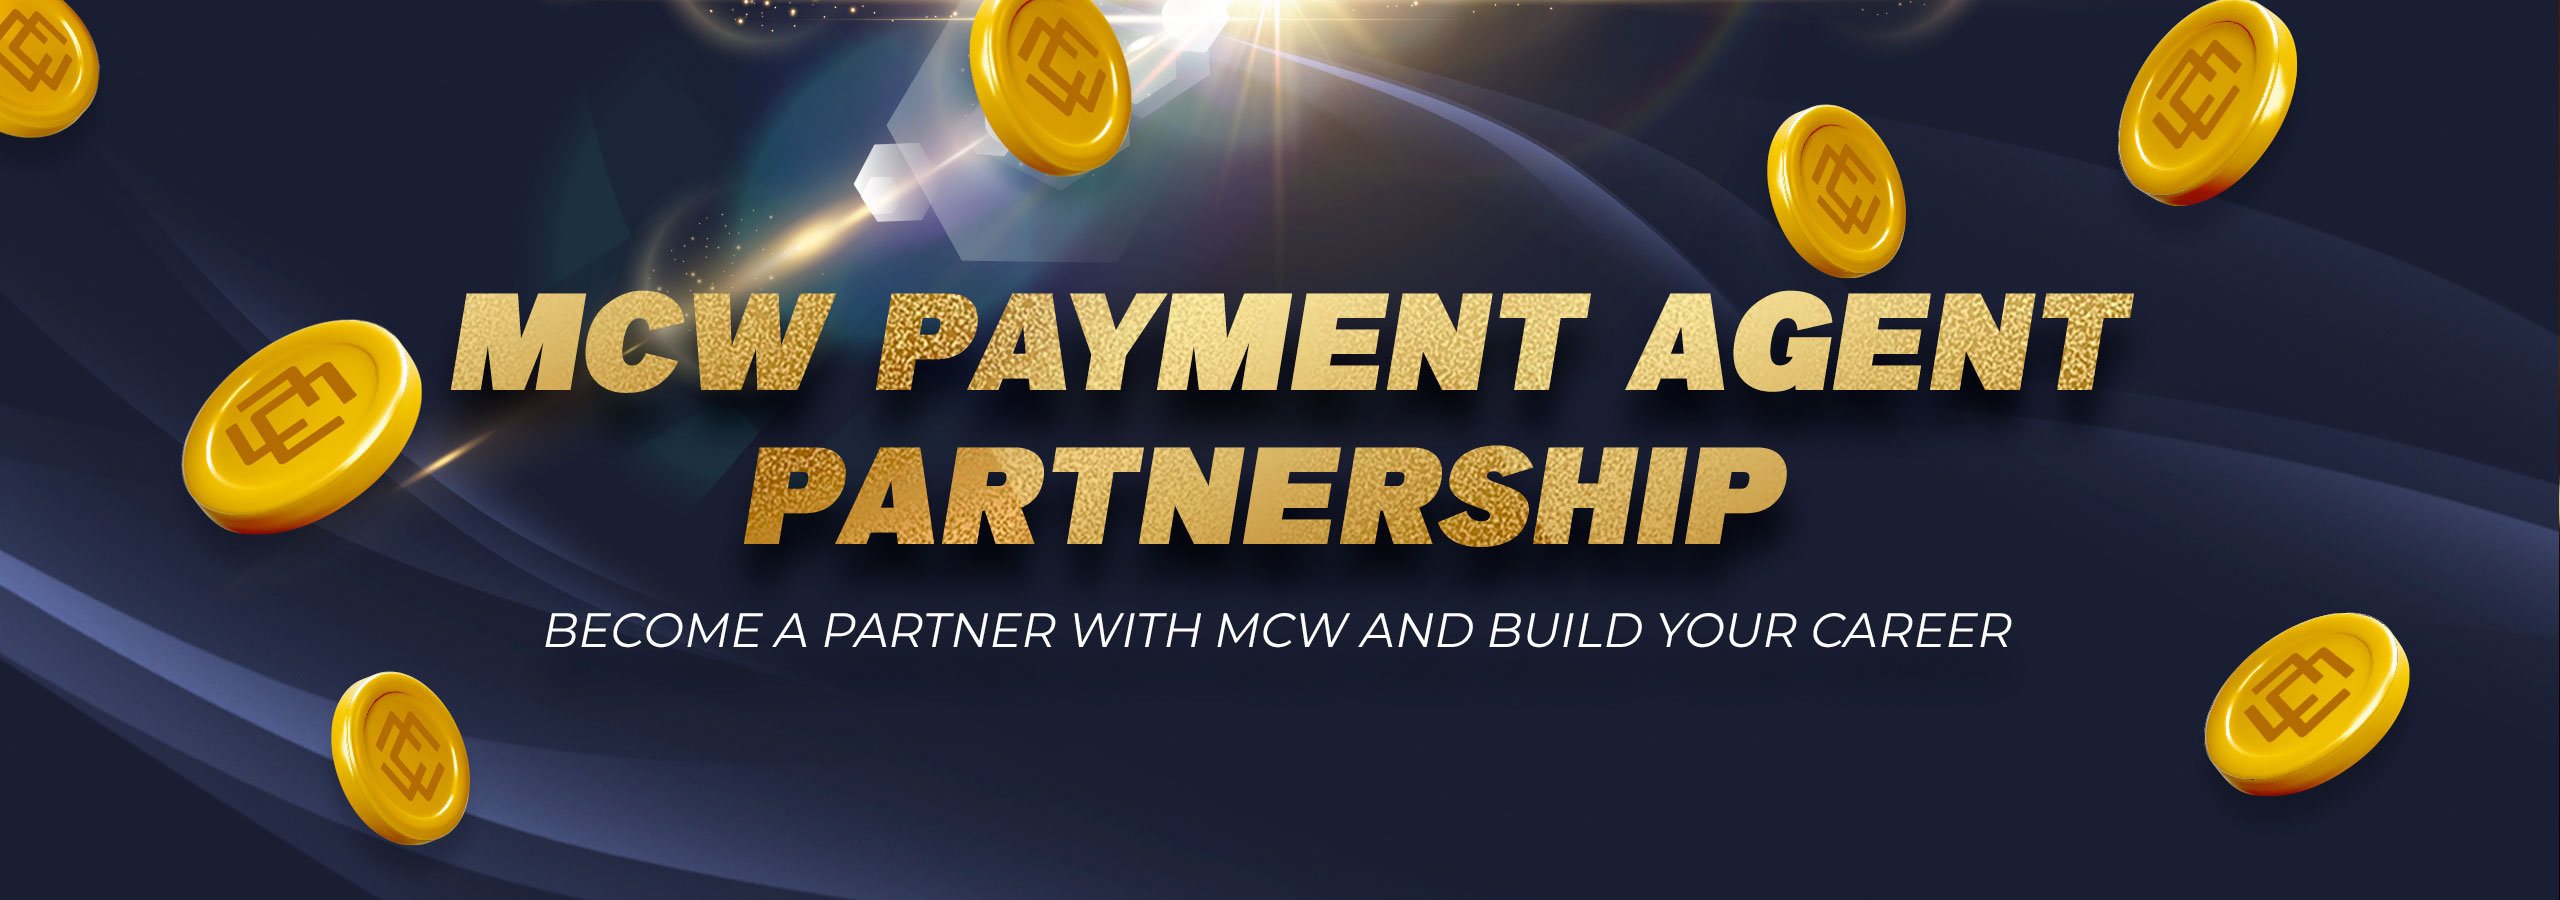 MCW PAYMENT AGENT PARTNERSHIP